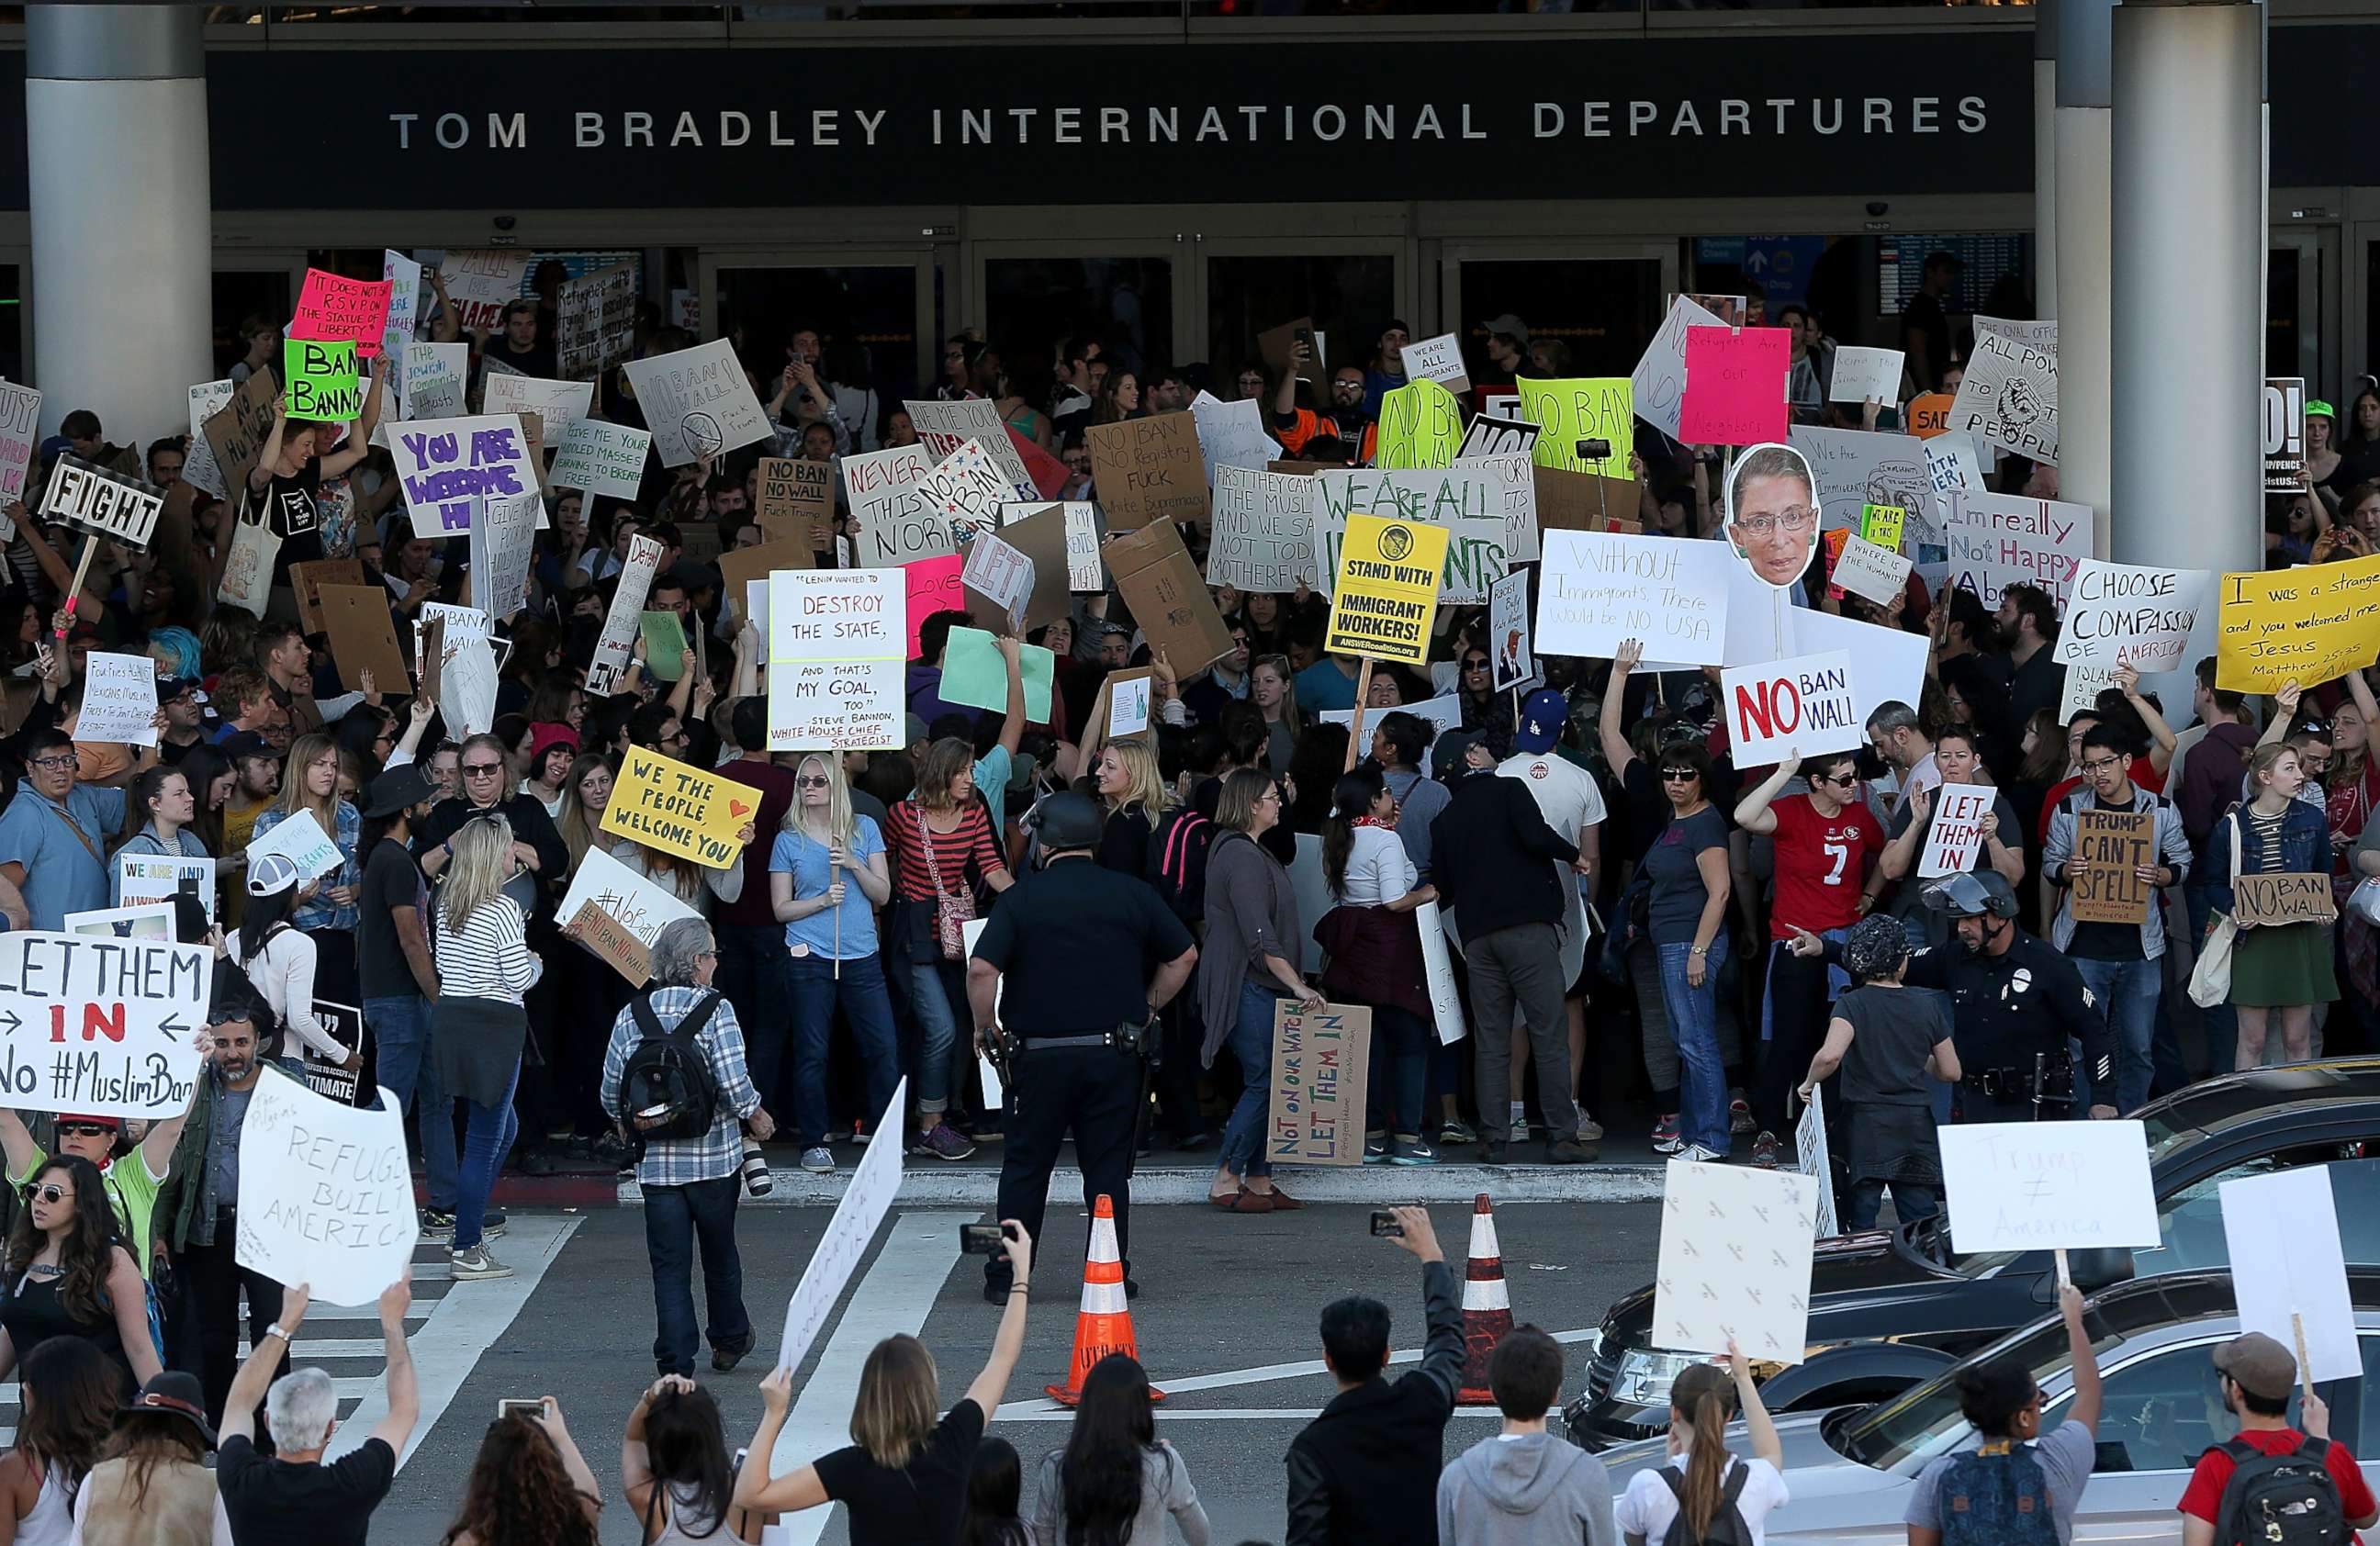 PHOTO: Protesters hold signs during a demonstration against the immigration ban that was imposed by President Donald Trump at Los Angeles International Airport, Jan. 29, 2017.